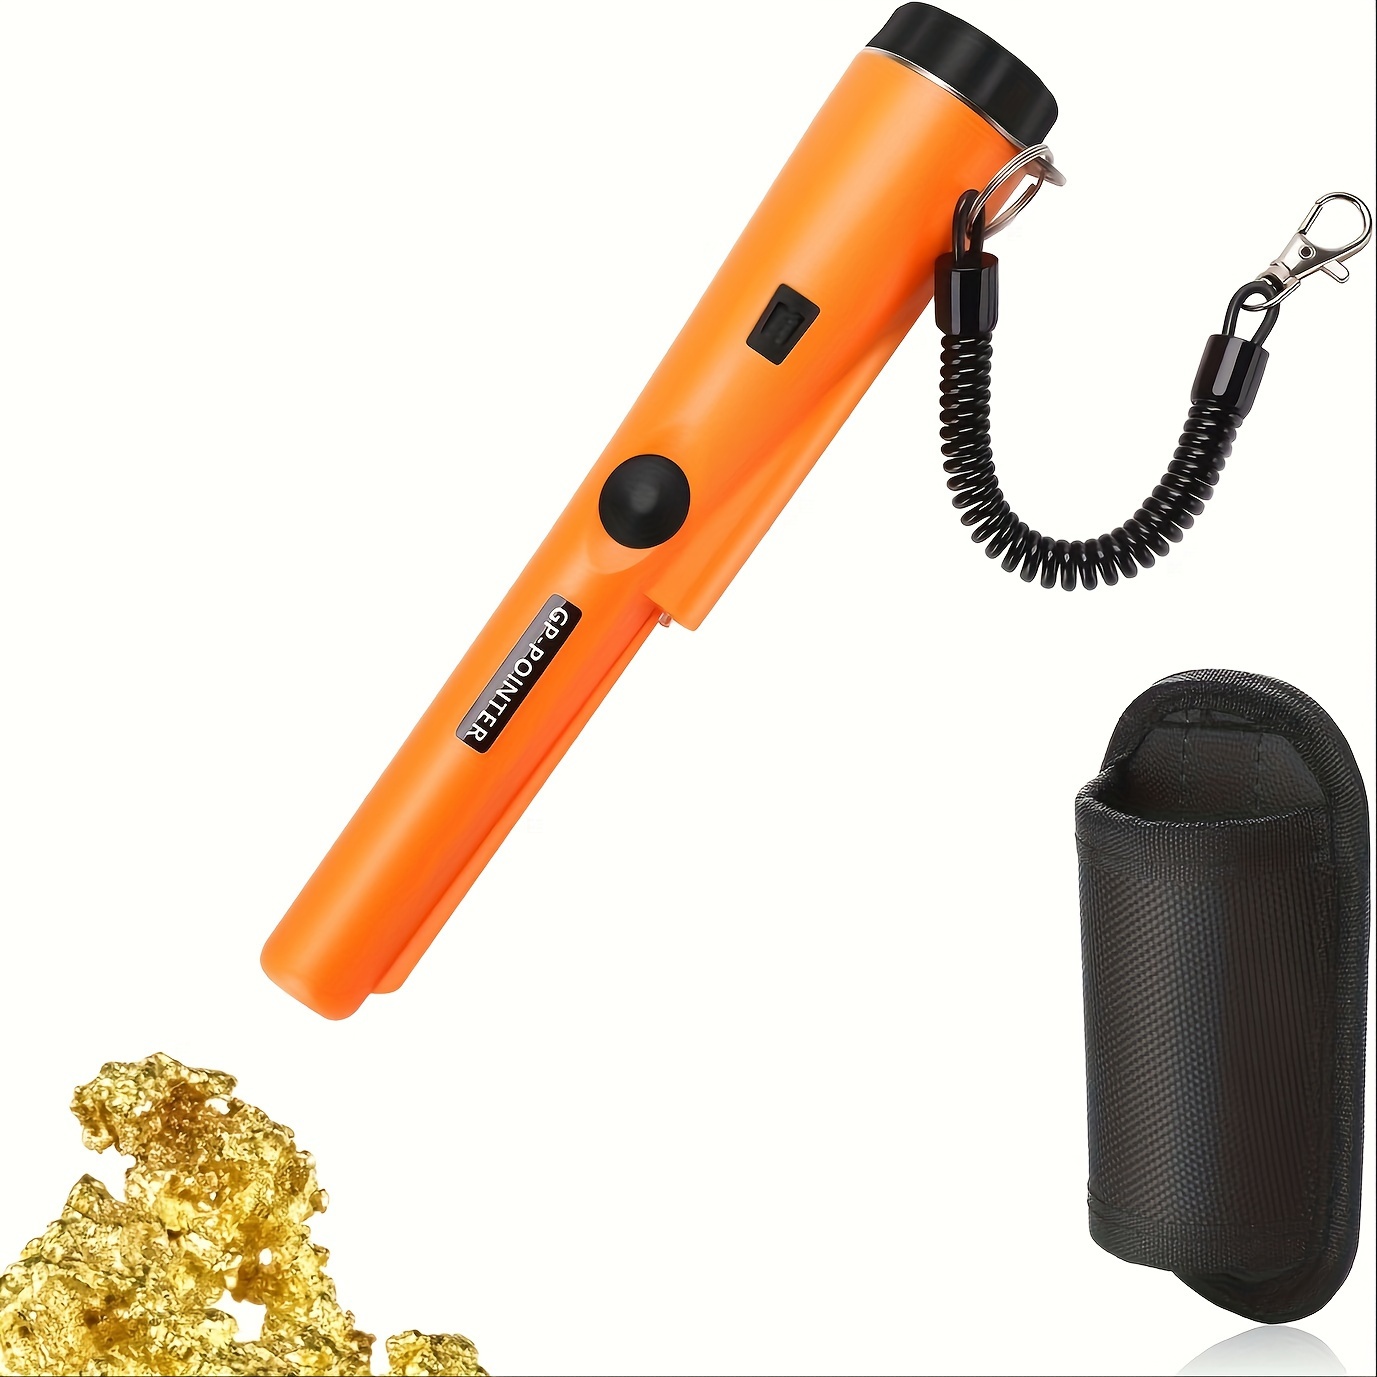 

1pc Metal Detector Pinpointer, Detector Wand, Handheld Pinpointer Wand, 360°search Treasure Pinpoint Finder Probe With Belt Holster High Sensitivity For Golden Coin Silvery Jewelry